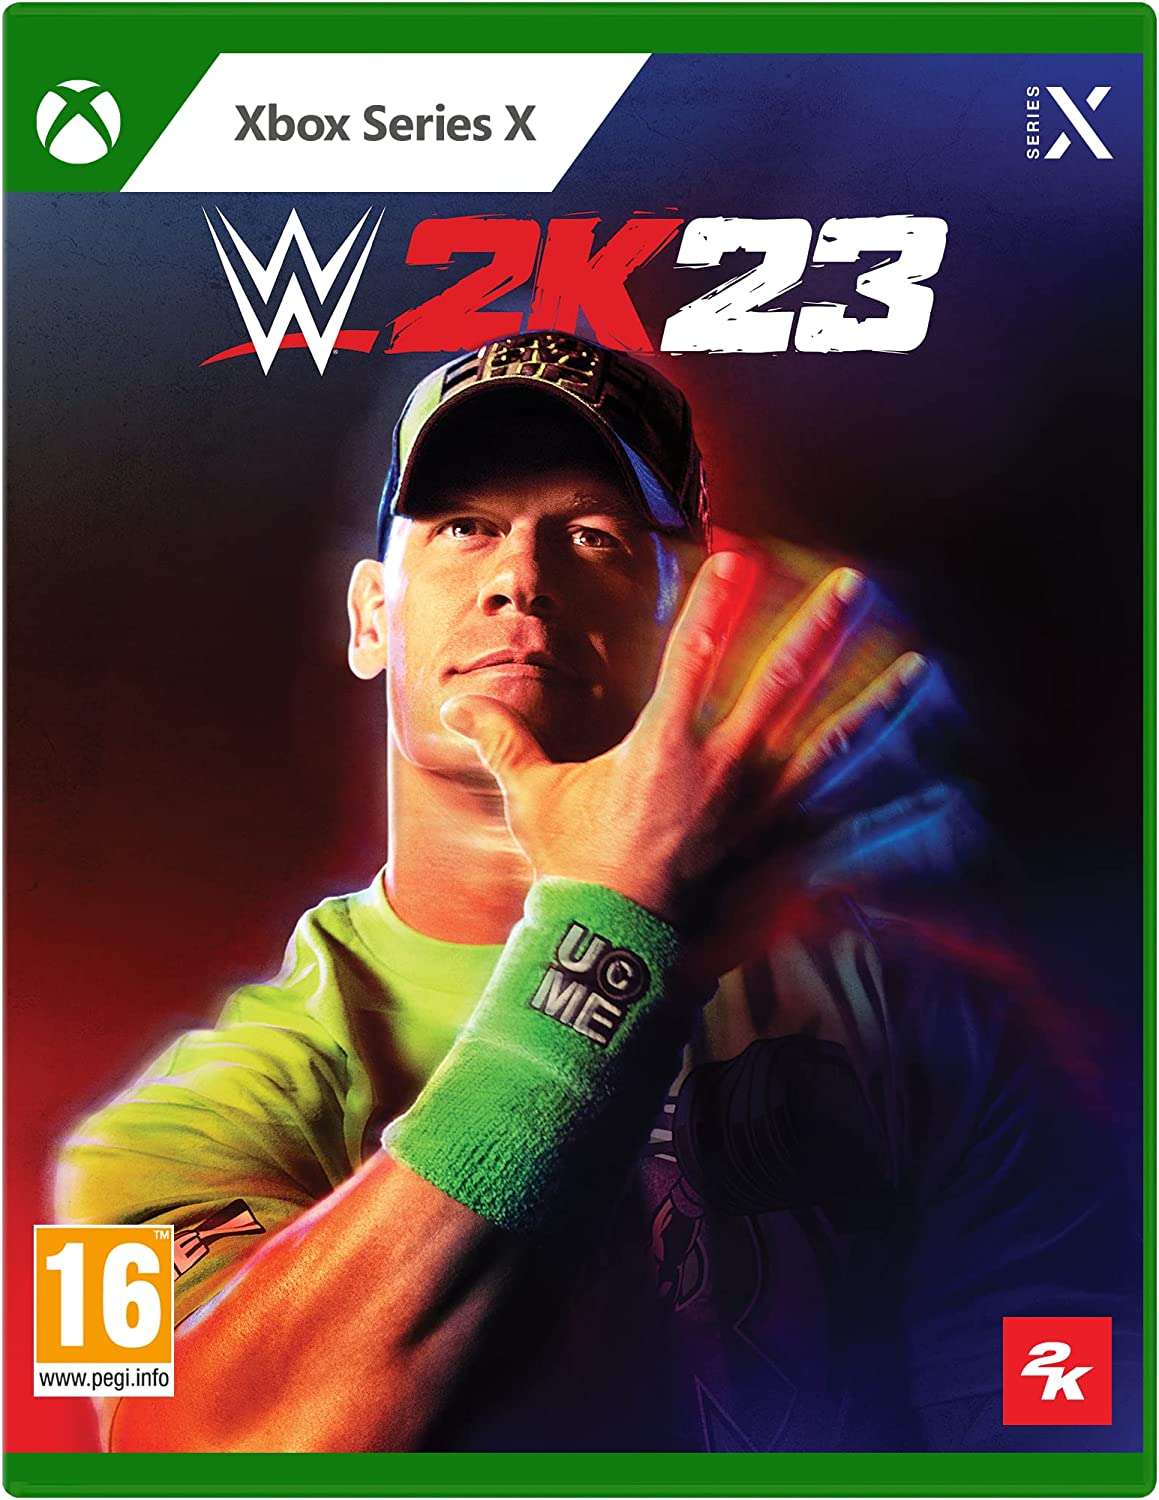 WWE 2K23 for XBOXSERIESX to buy